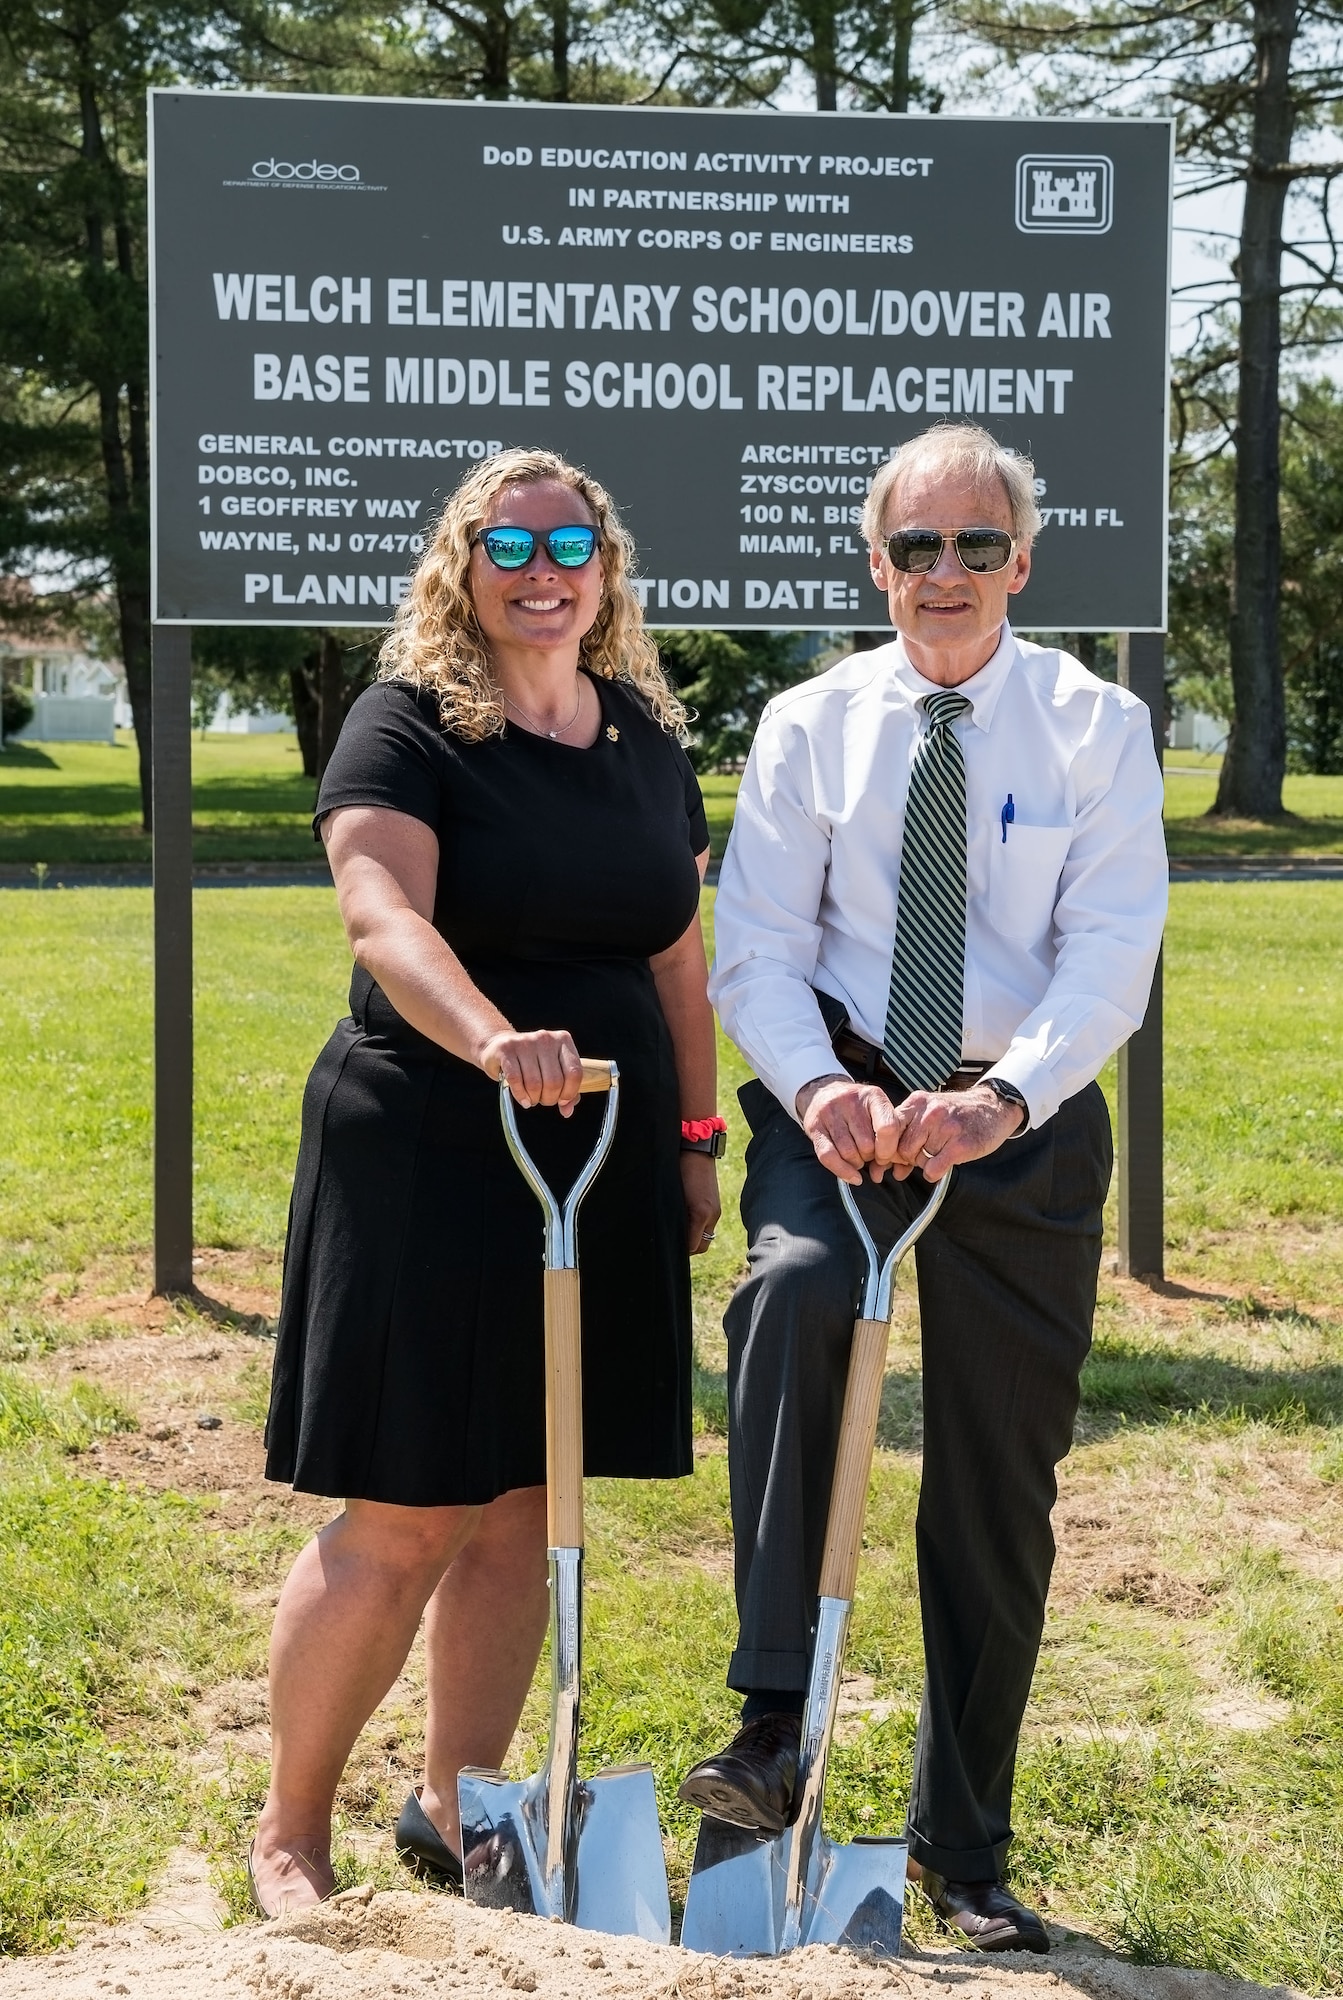 Sen. Tom Carper, D-Del., and Jessica Marelli, Caesar Rodney School District Board of Education president, Camden, Del., pose for a photo after the groundbreaking ceremony for the new Welch Elementary School/Dover Air Base Middle School June 3, 2019, in the family housing area at Dover Air Force Base, Del. The $48 million project federally funded by the Department of Defense Education Activity will be built at the football field across the street form the Youth Center and adjacent to the existing elementary and middle schools. Scheduled to open at the beginning of the 2021 school year, the new building will have more than 105,000 square feet in learning space for approximately 490 students. (U.S. Air Force photo by Roland Balik)